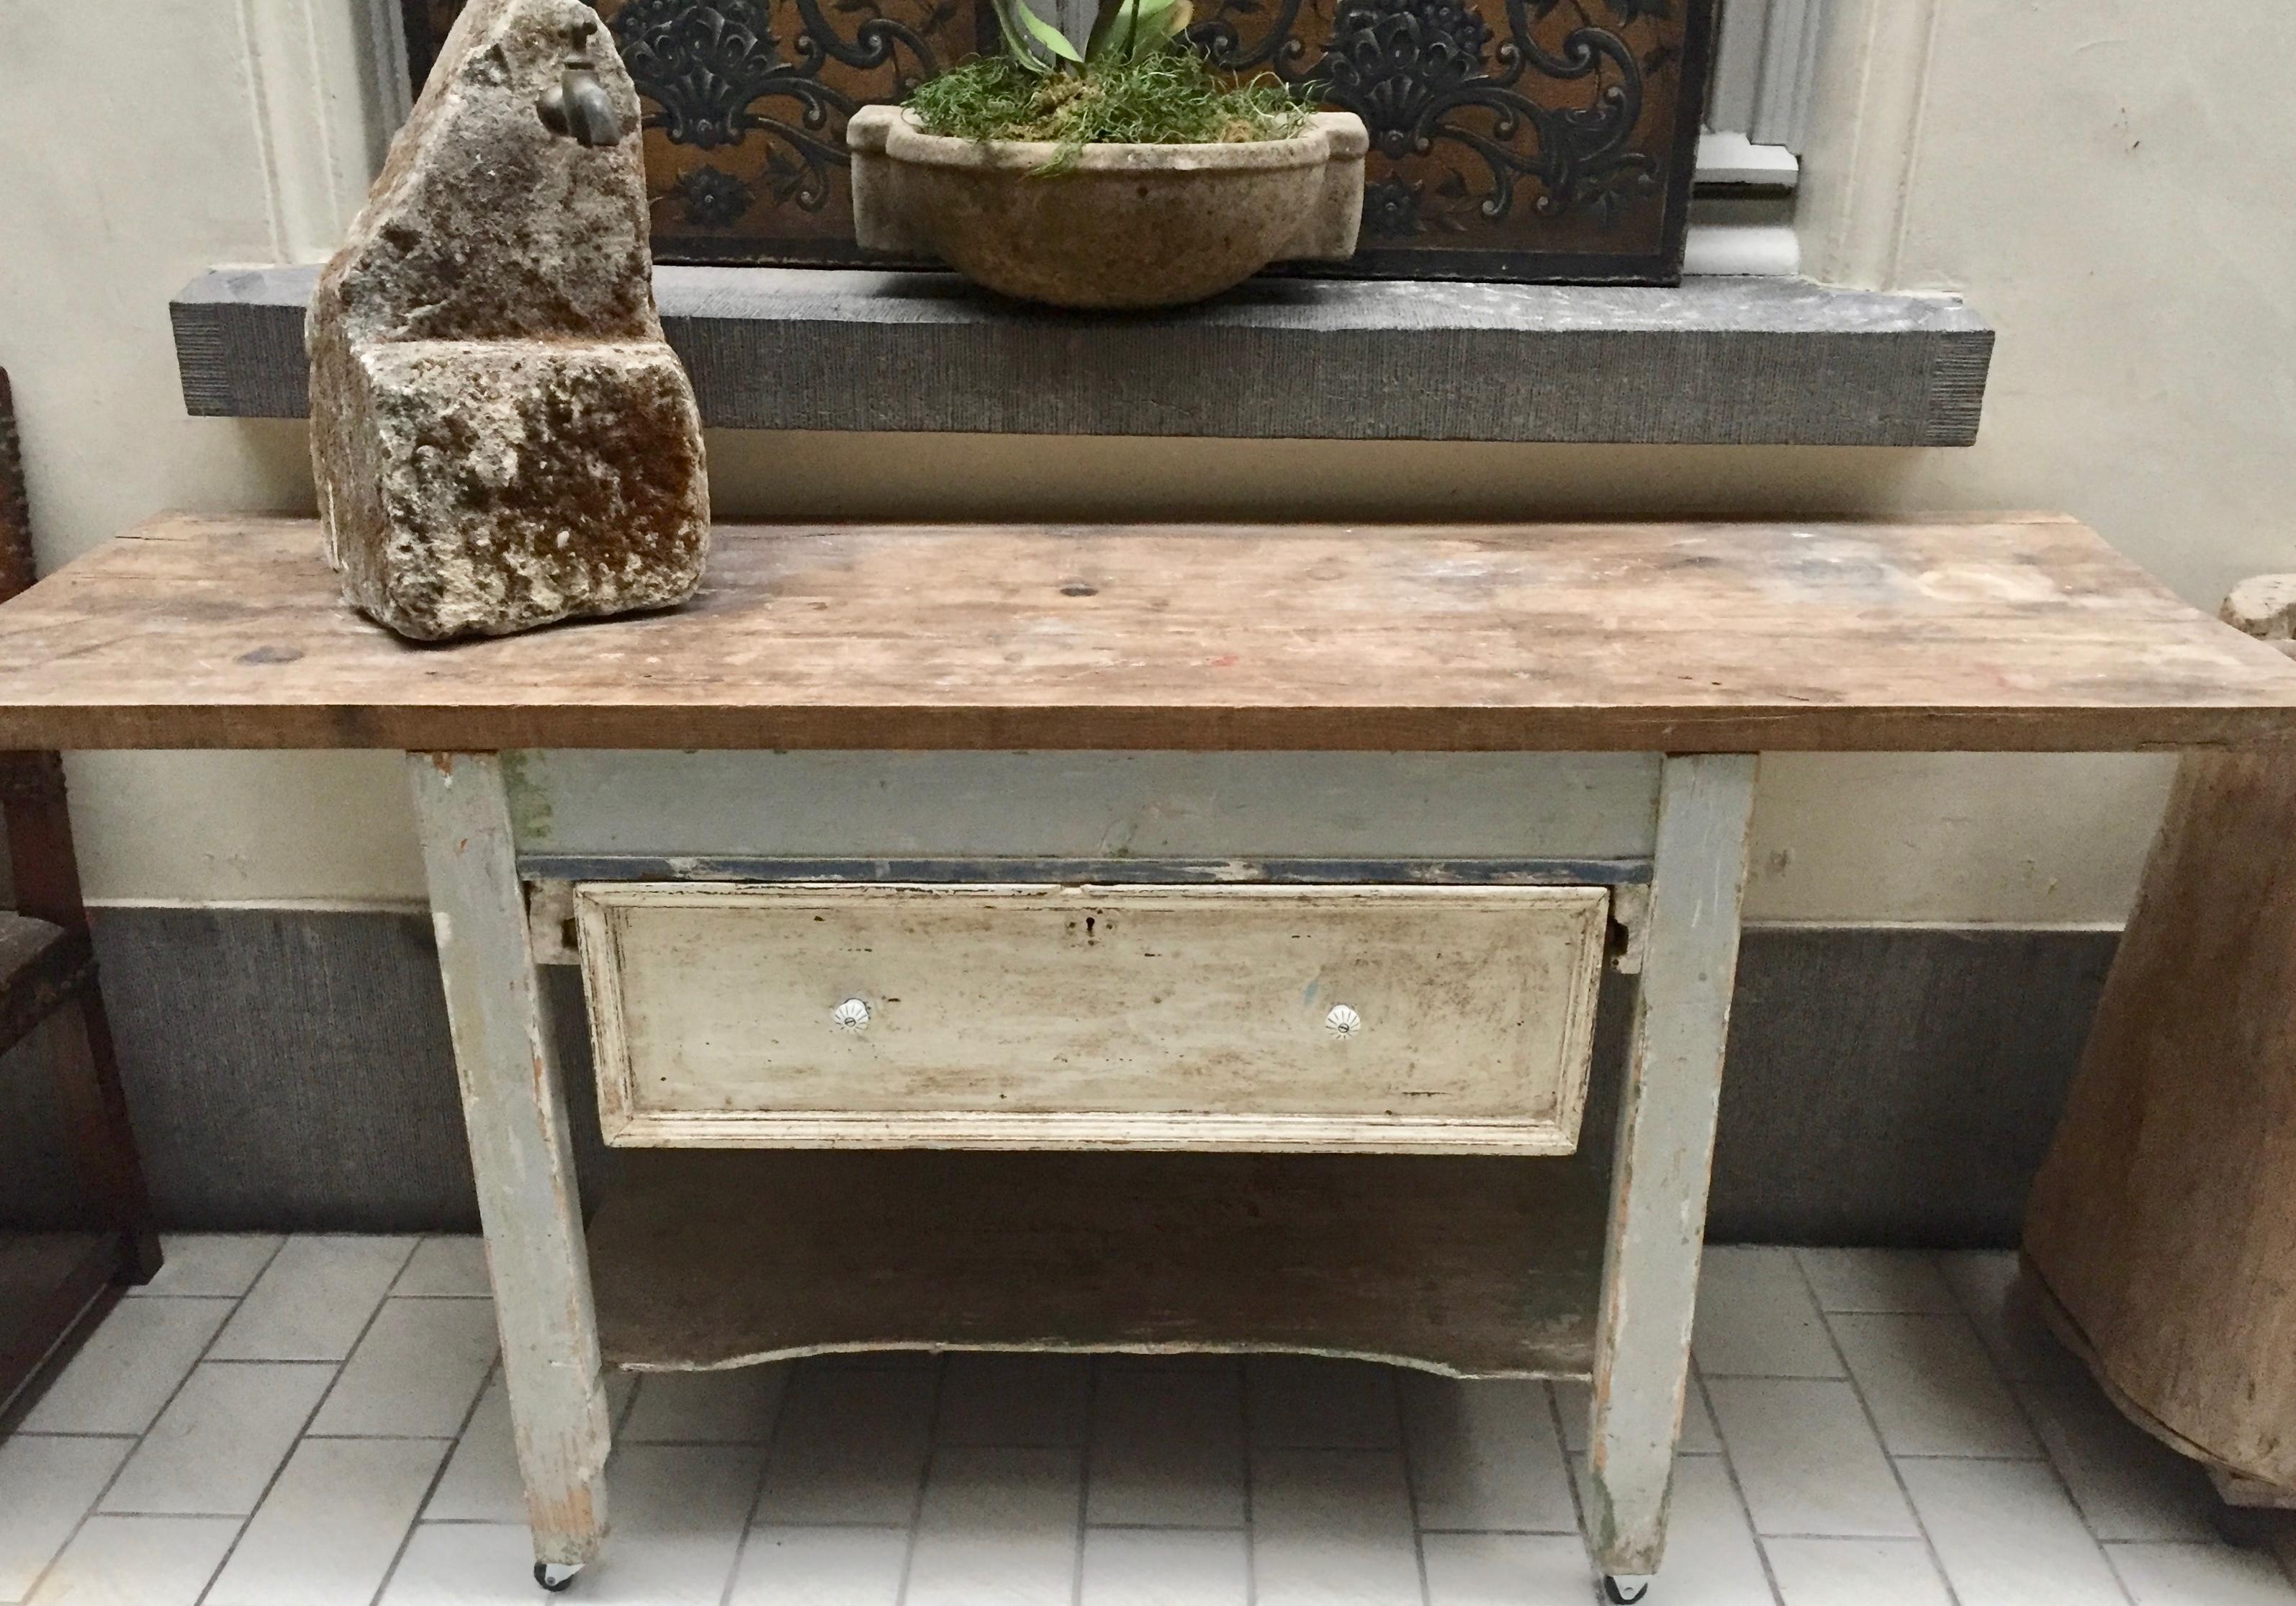 German country kitchen work table circa 1890-1910. The base has one very deep drawer
( with the original porcelain knobs) which was used to place dough to rise, but is now the perfect place for pots, measuring cups and baking dishes. The base has